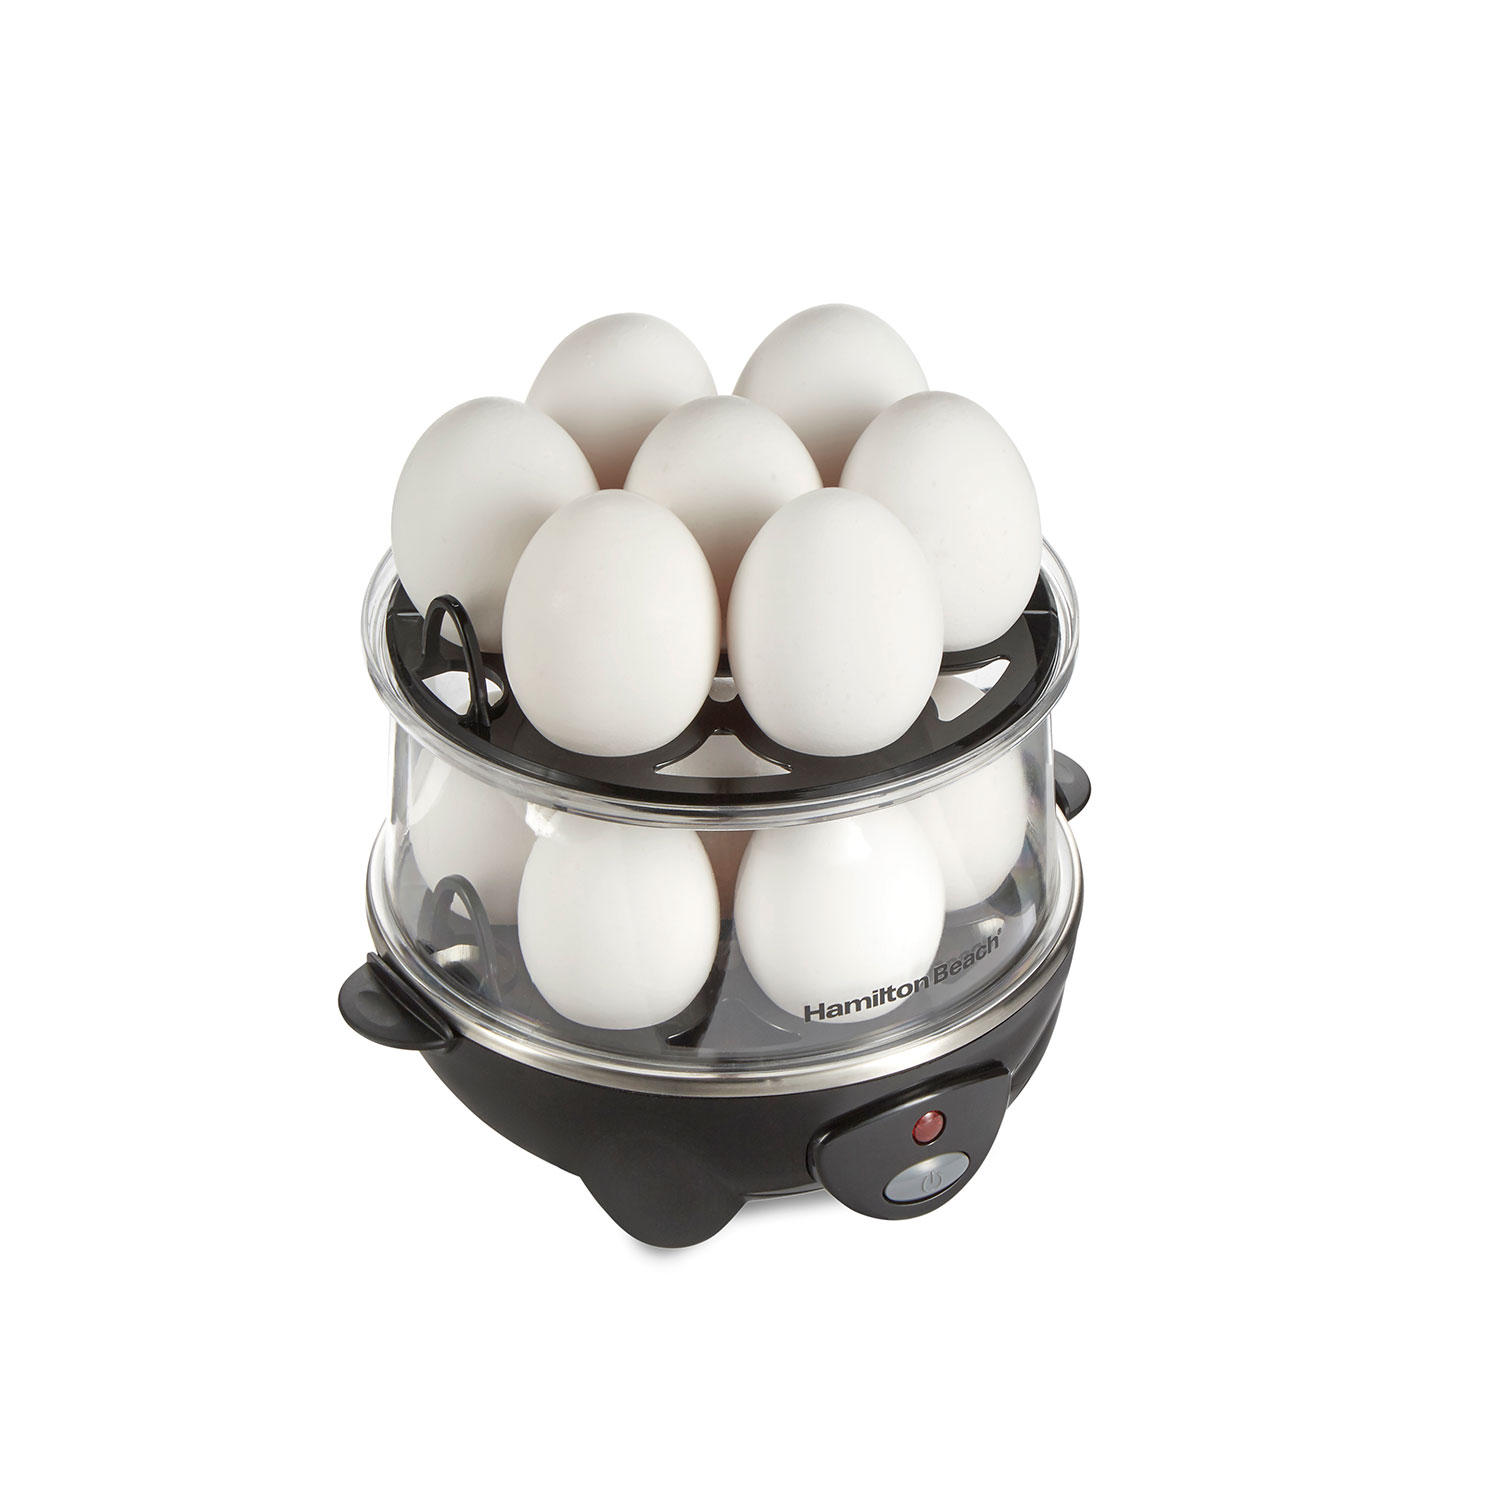 3-in-1 Egg Cooker with 14 Egg Capacity (25508)